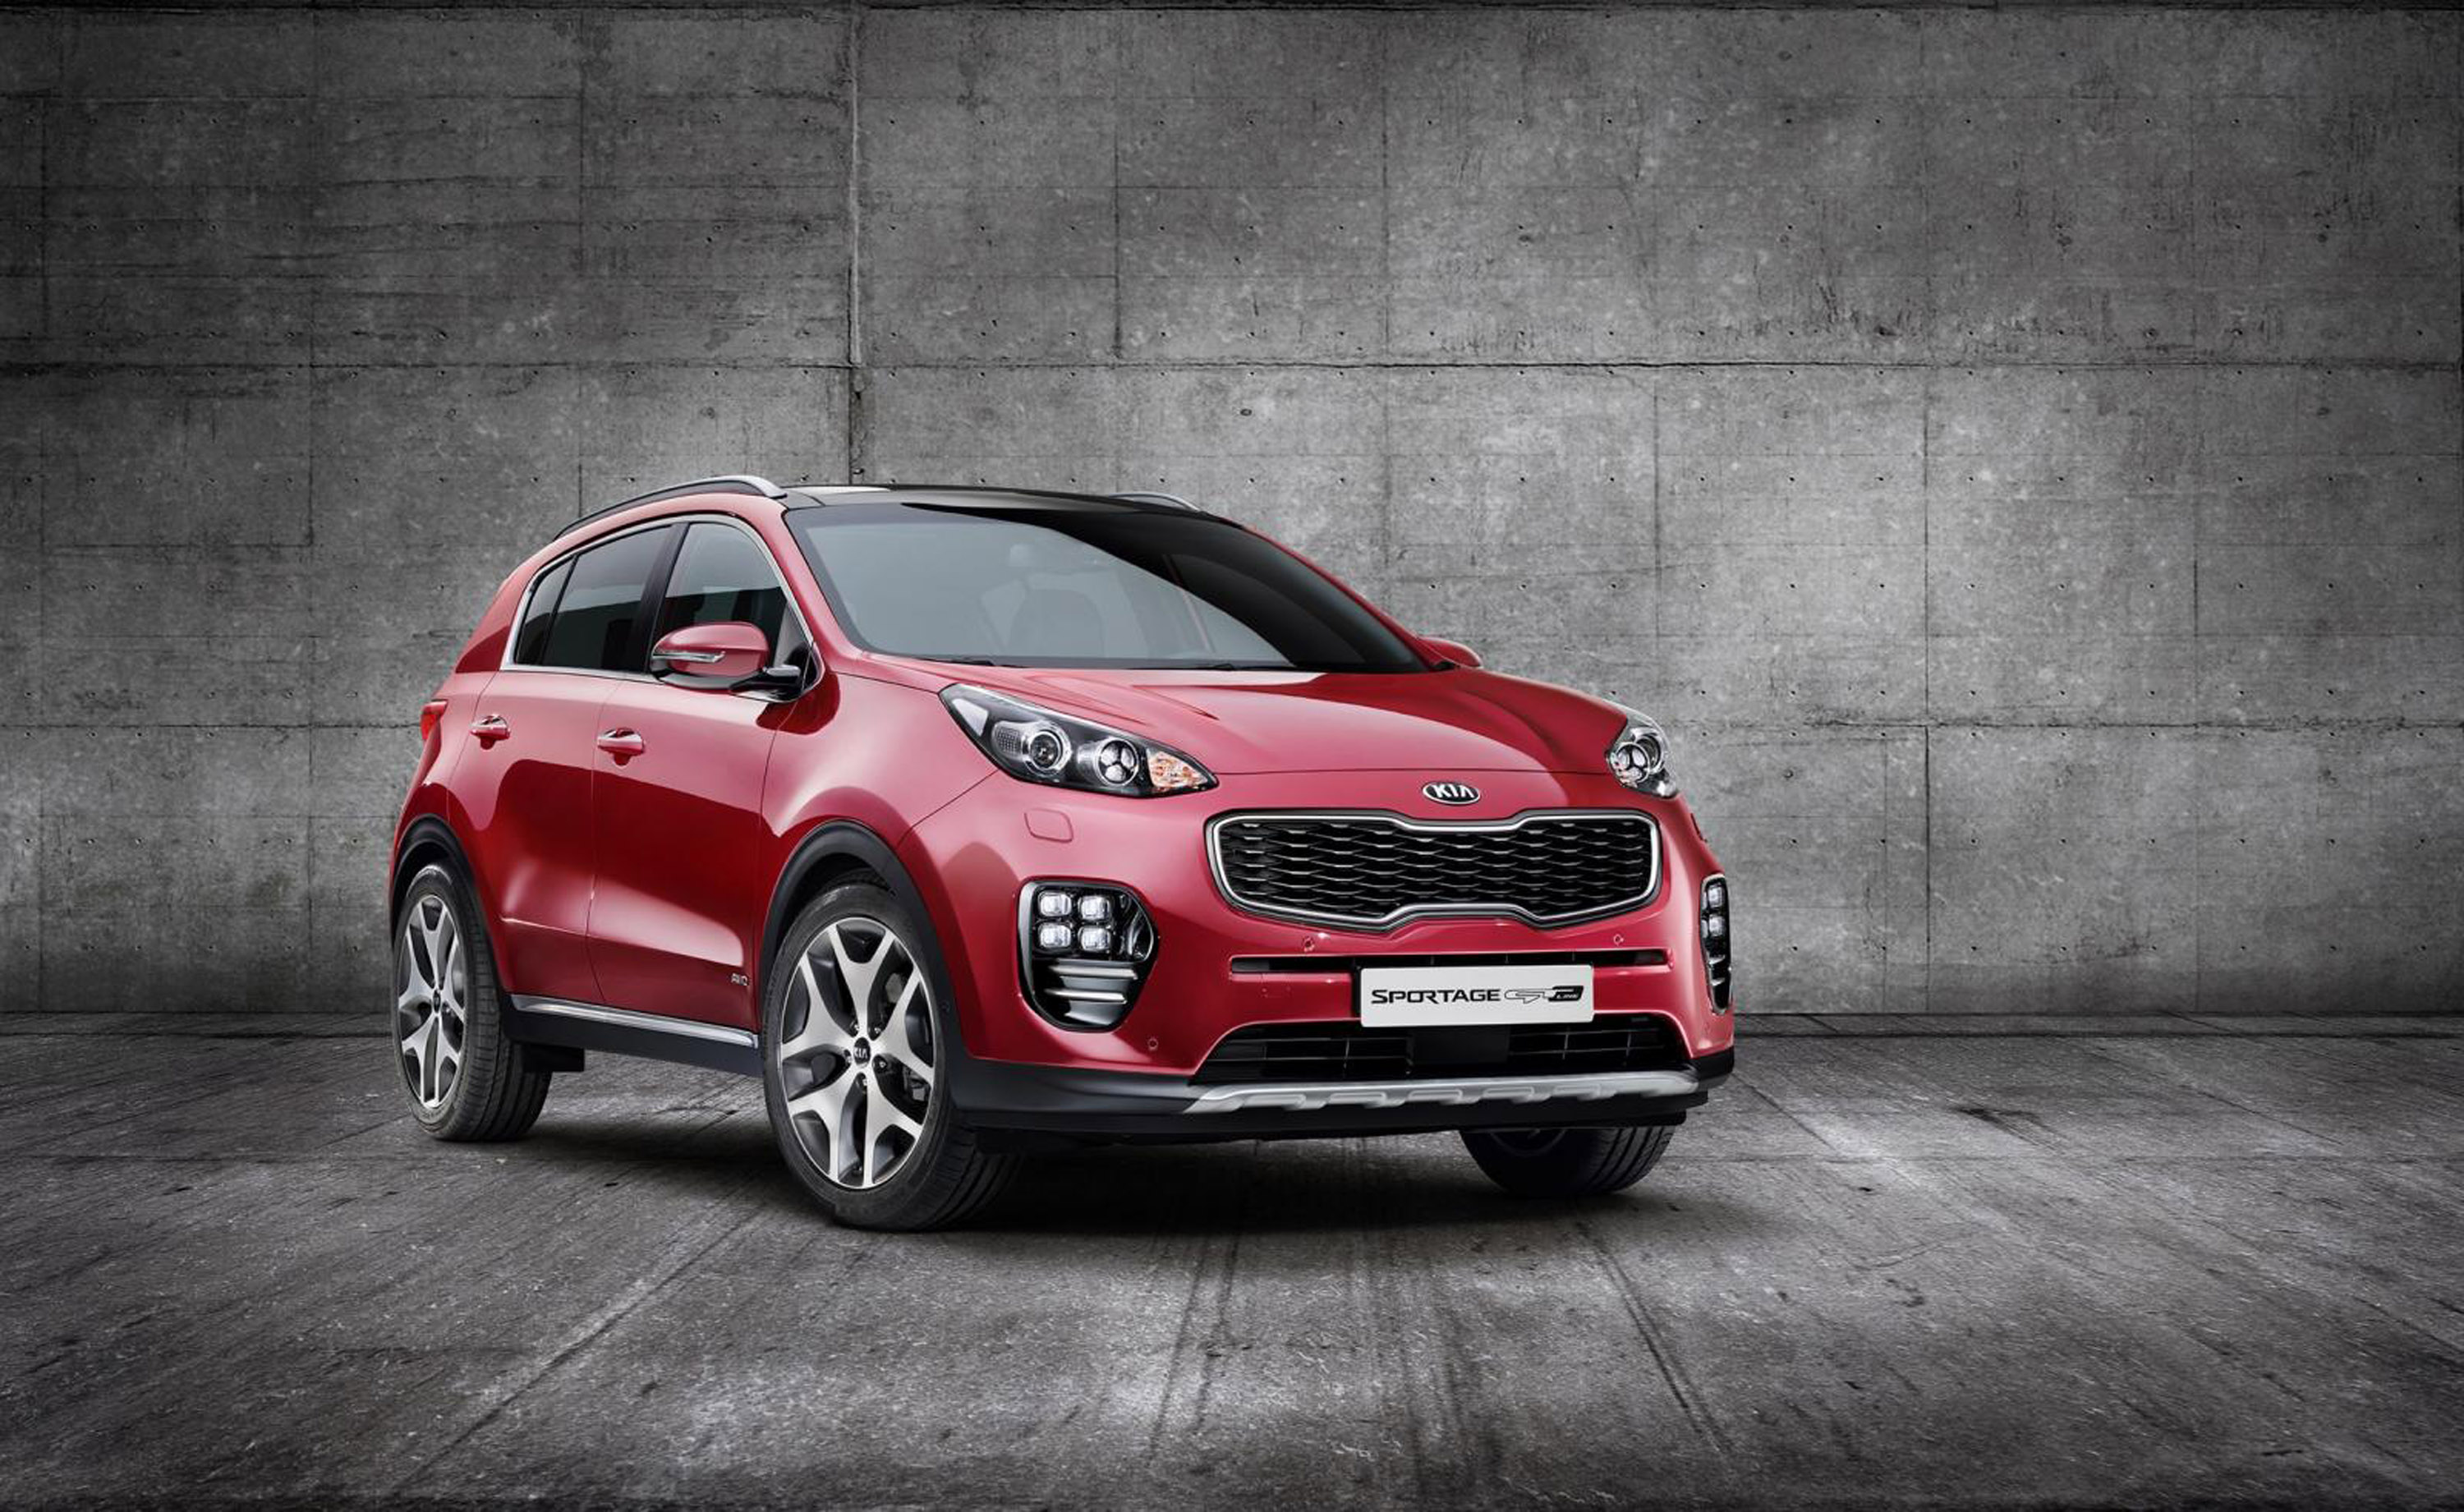 2016 Kia Sportage comes with promise for outstanding performance